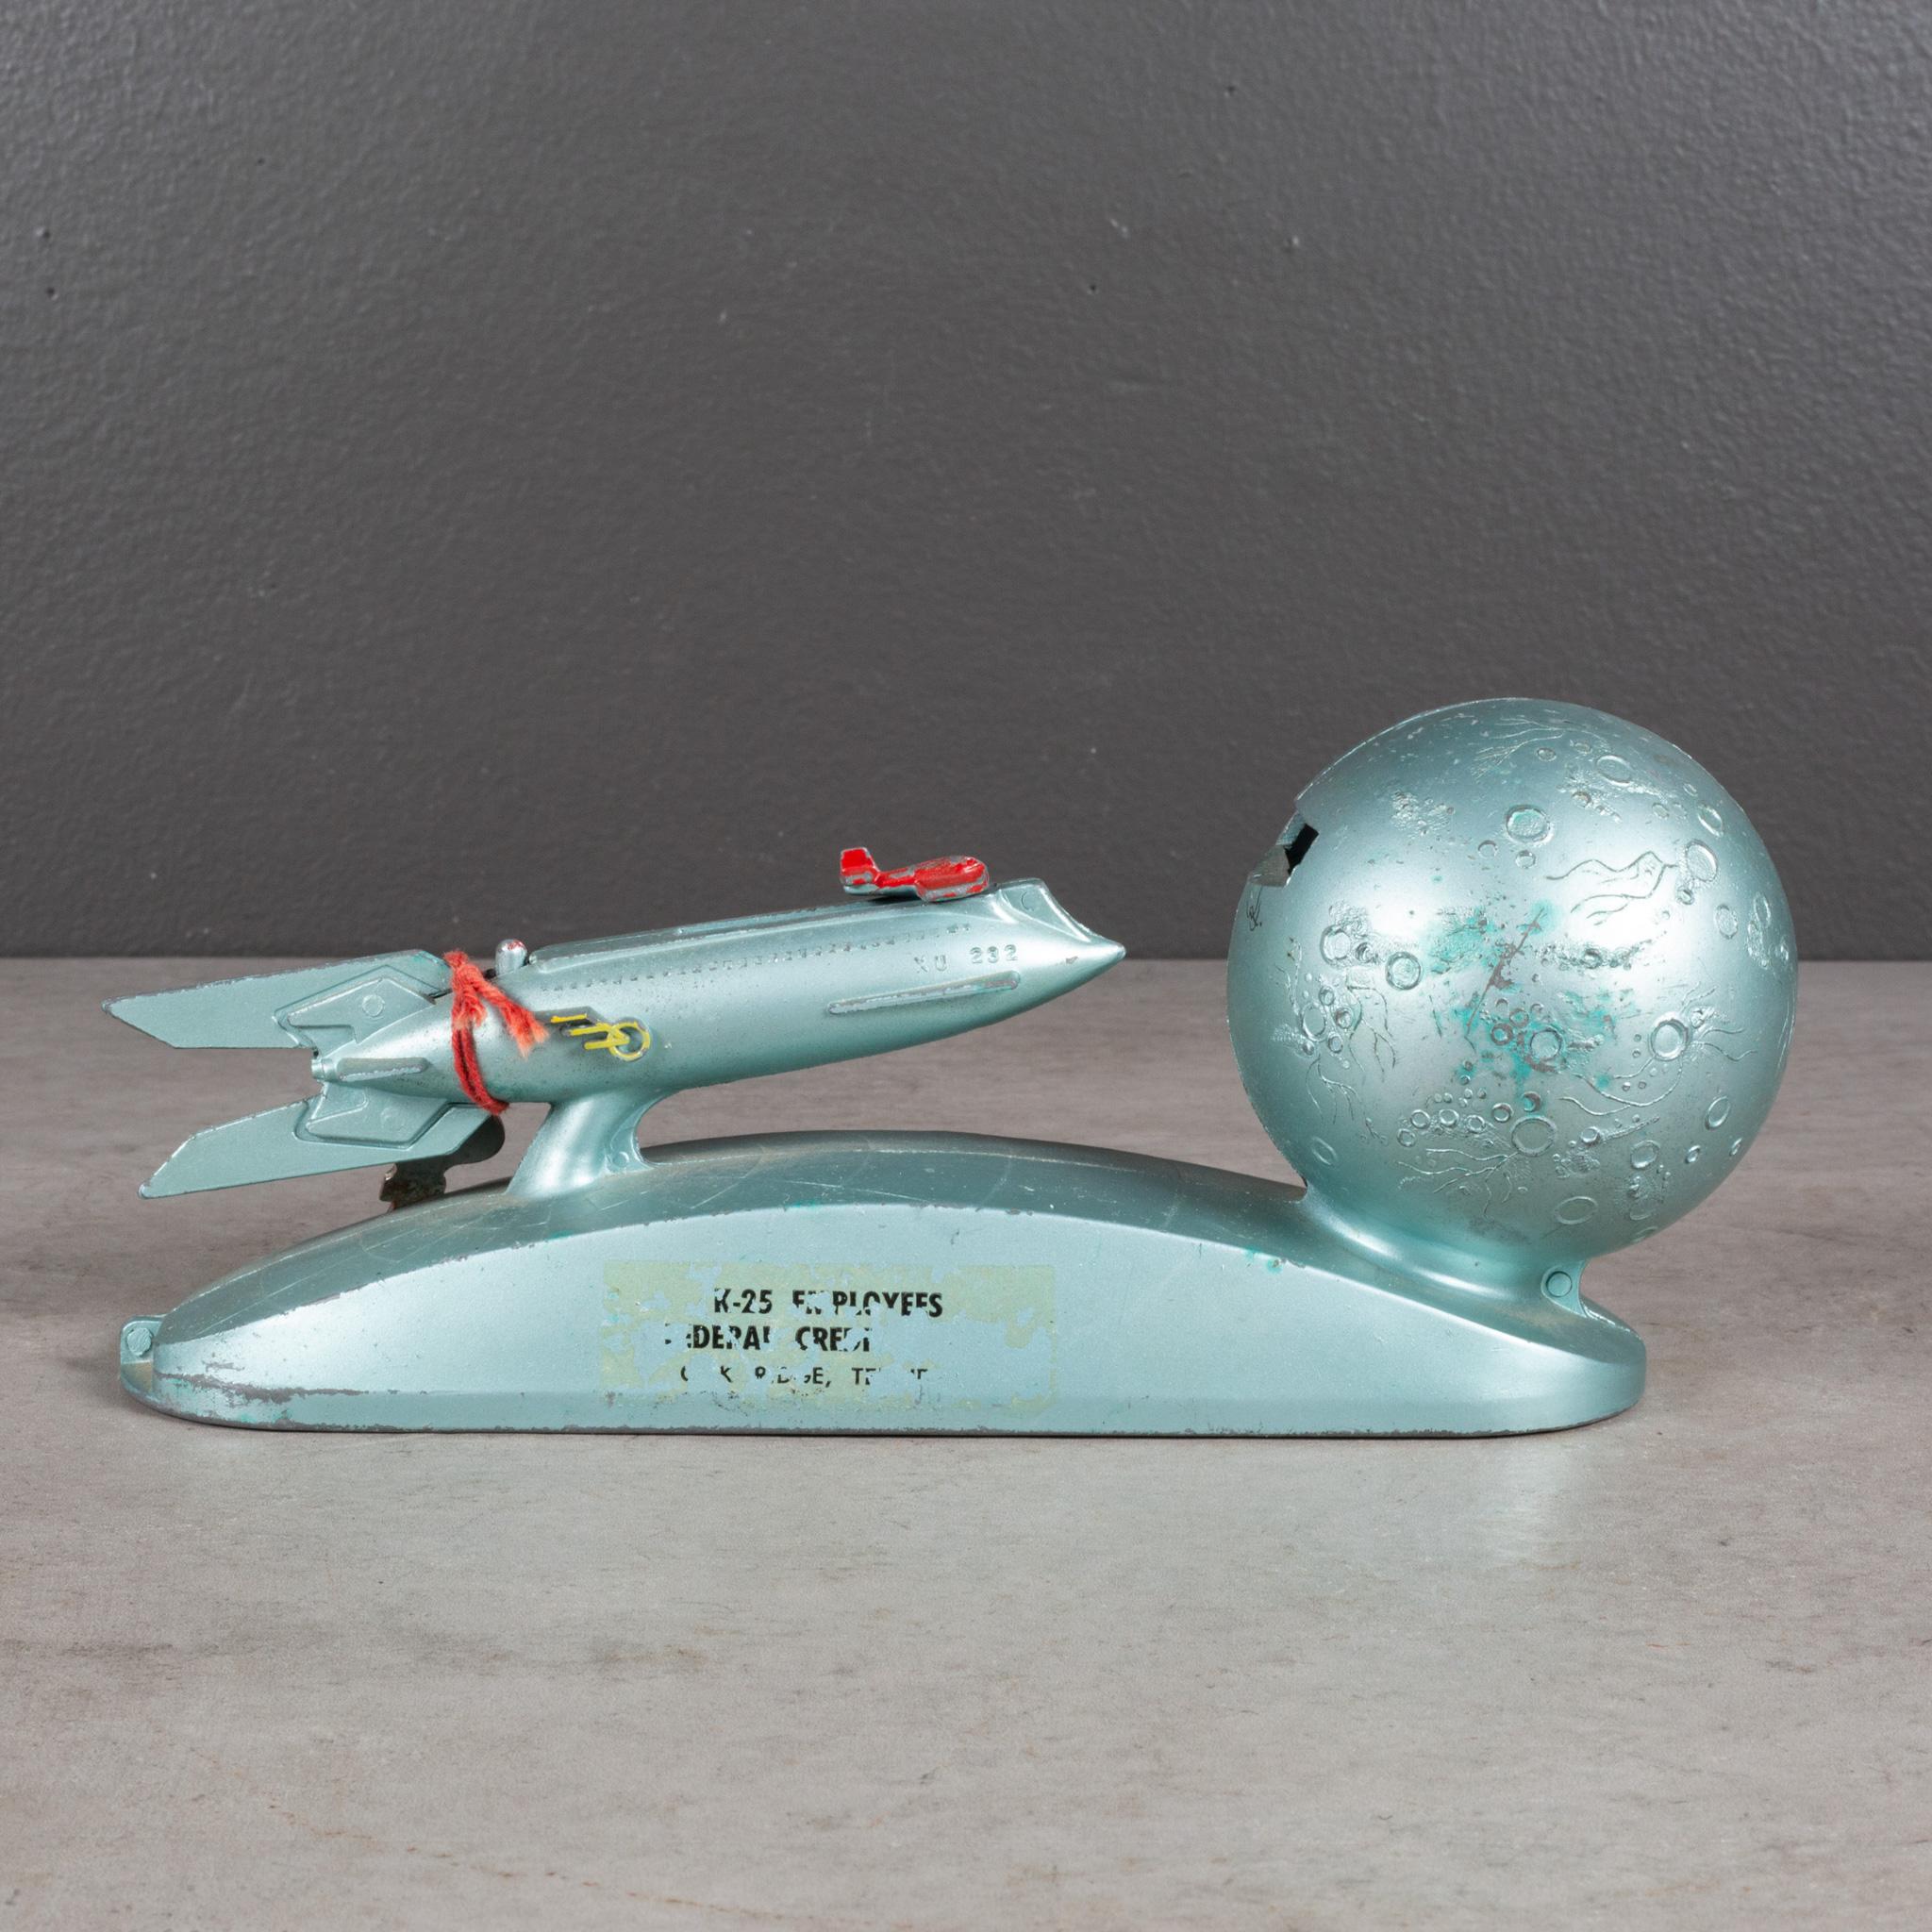 ABOUT
This metal, mechanical bank includes a red plane mechanism for launching coins from the rocket into the moon. Works properly. Includes key to unlock the bottom to retrieve the coins. 

    CREATOR Duro Mold and Mfg.
    DATE OF MANUFACTURE